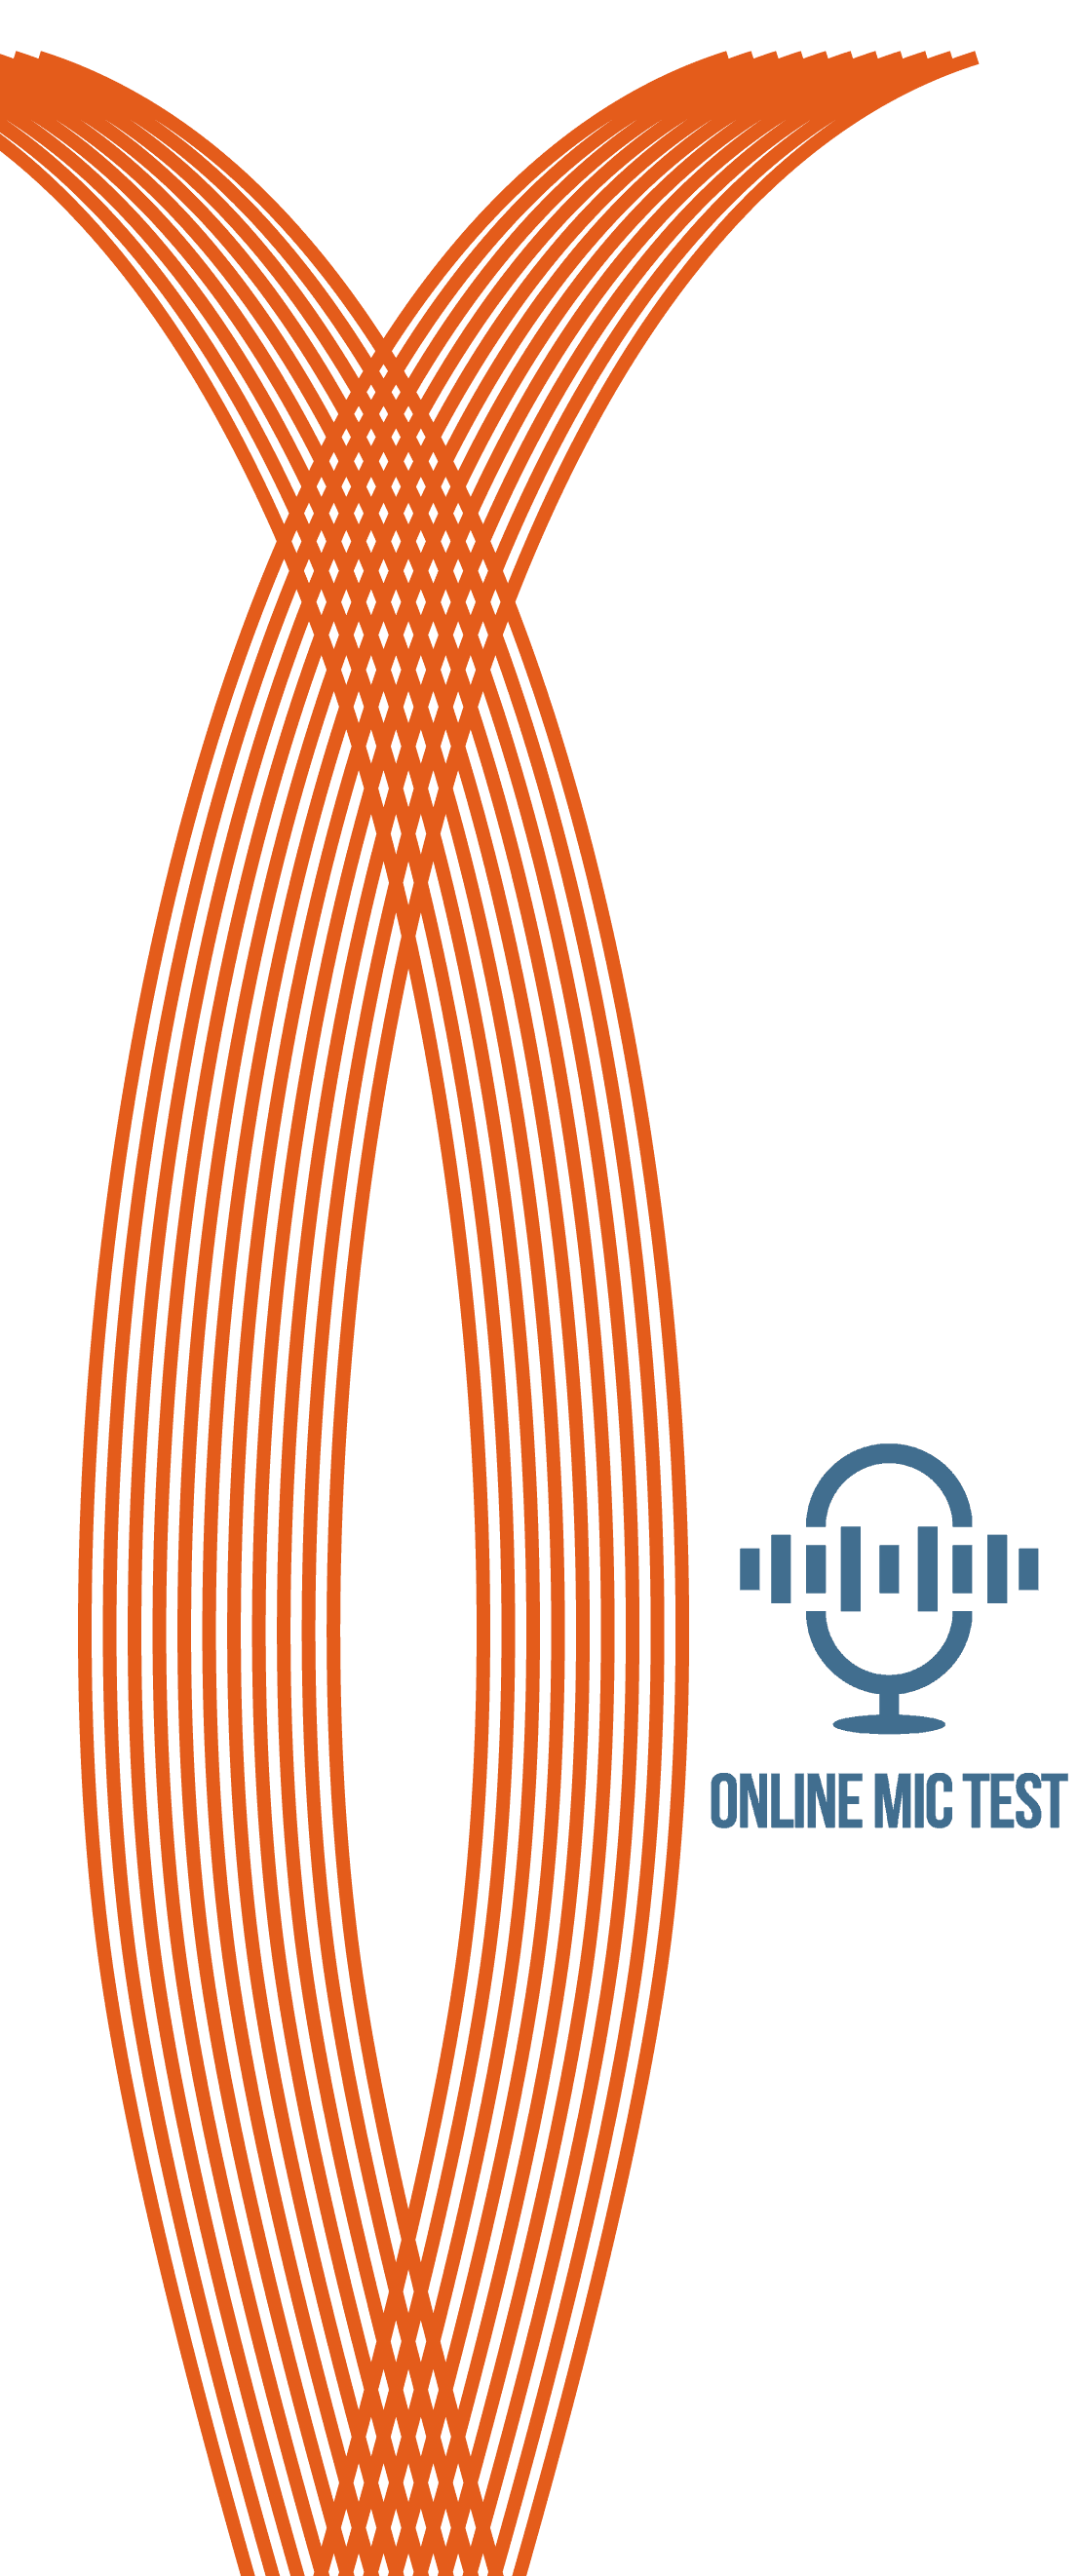 zuur brandwond pad Microphone Test - Check Your Mic With Our Online Tool | OnlineMicTest